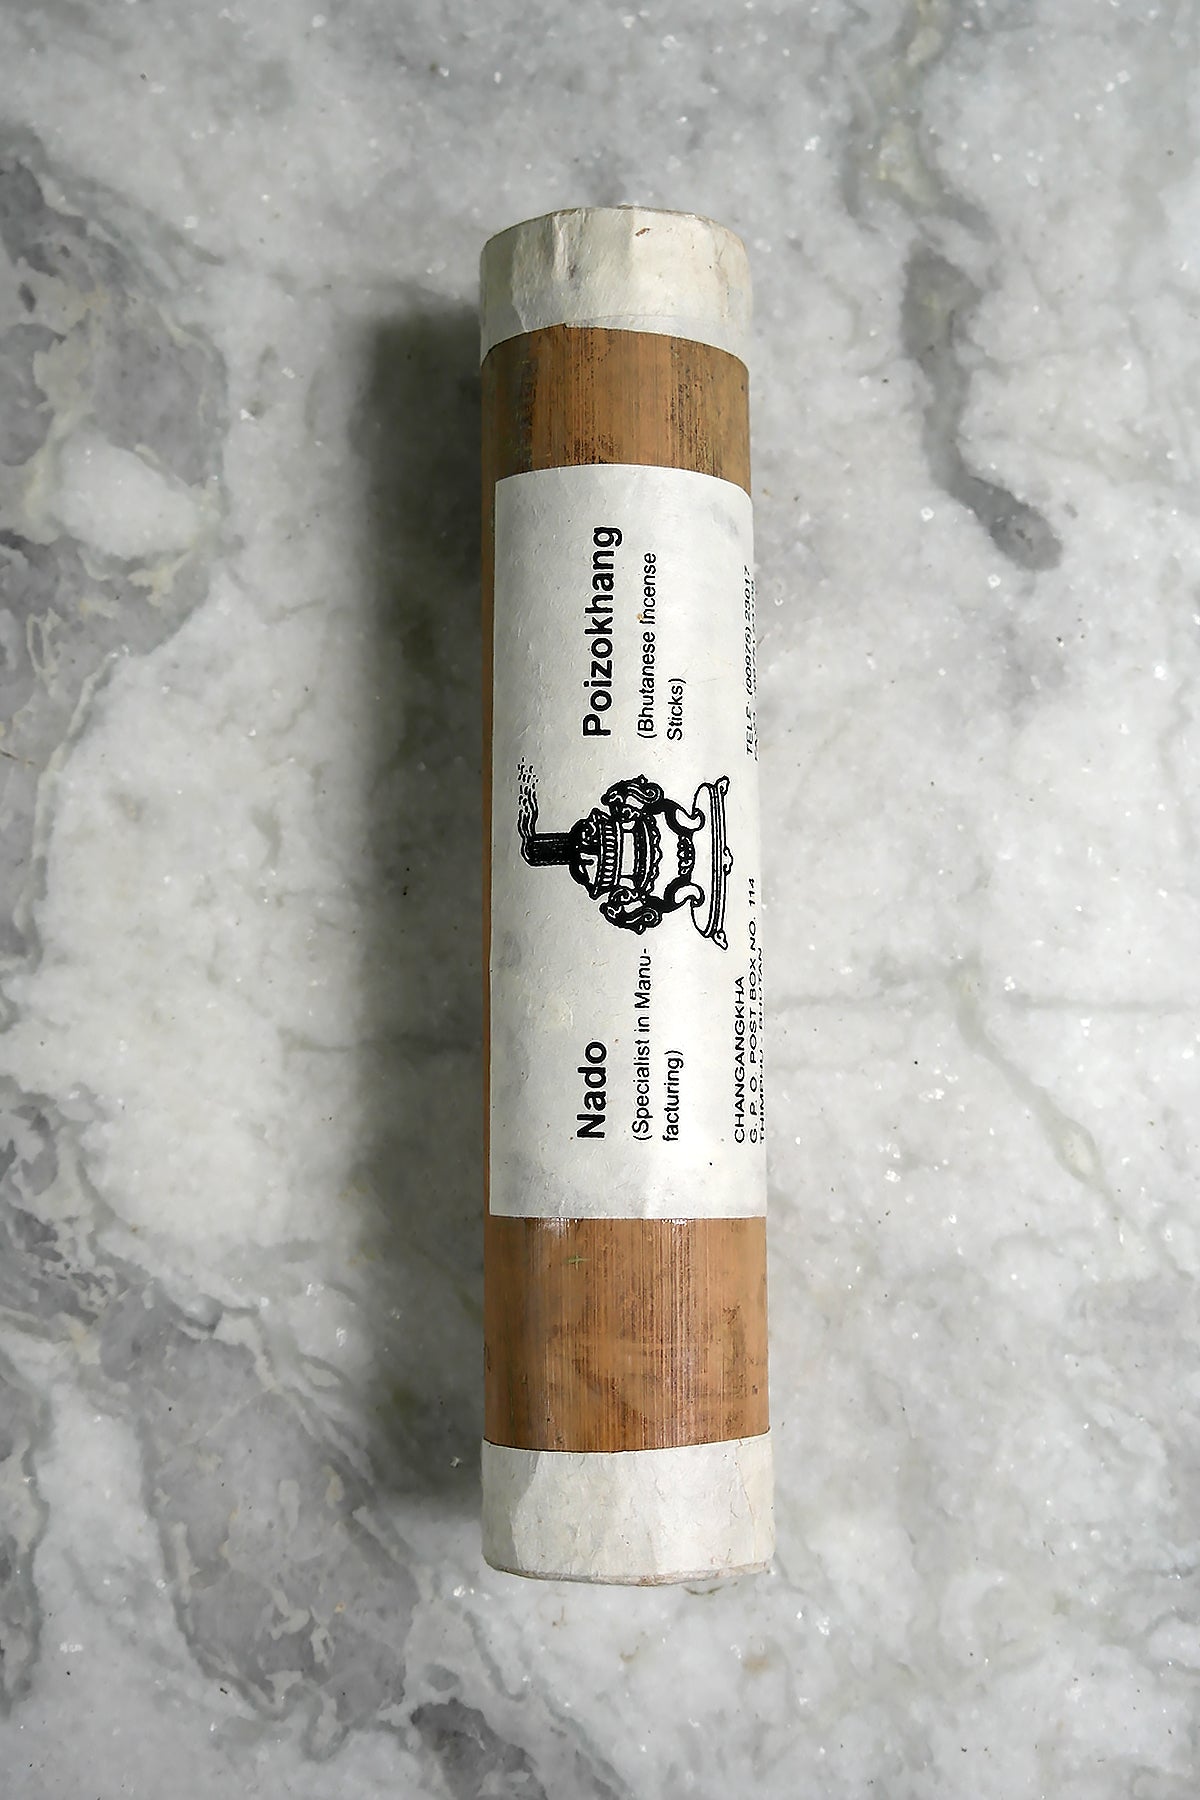 Nado Poizokhang Traditional Bhutanese Incense Stick in Bamboo pack